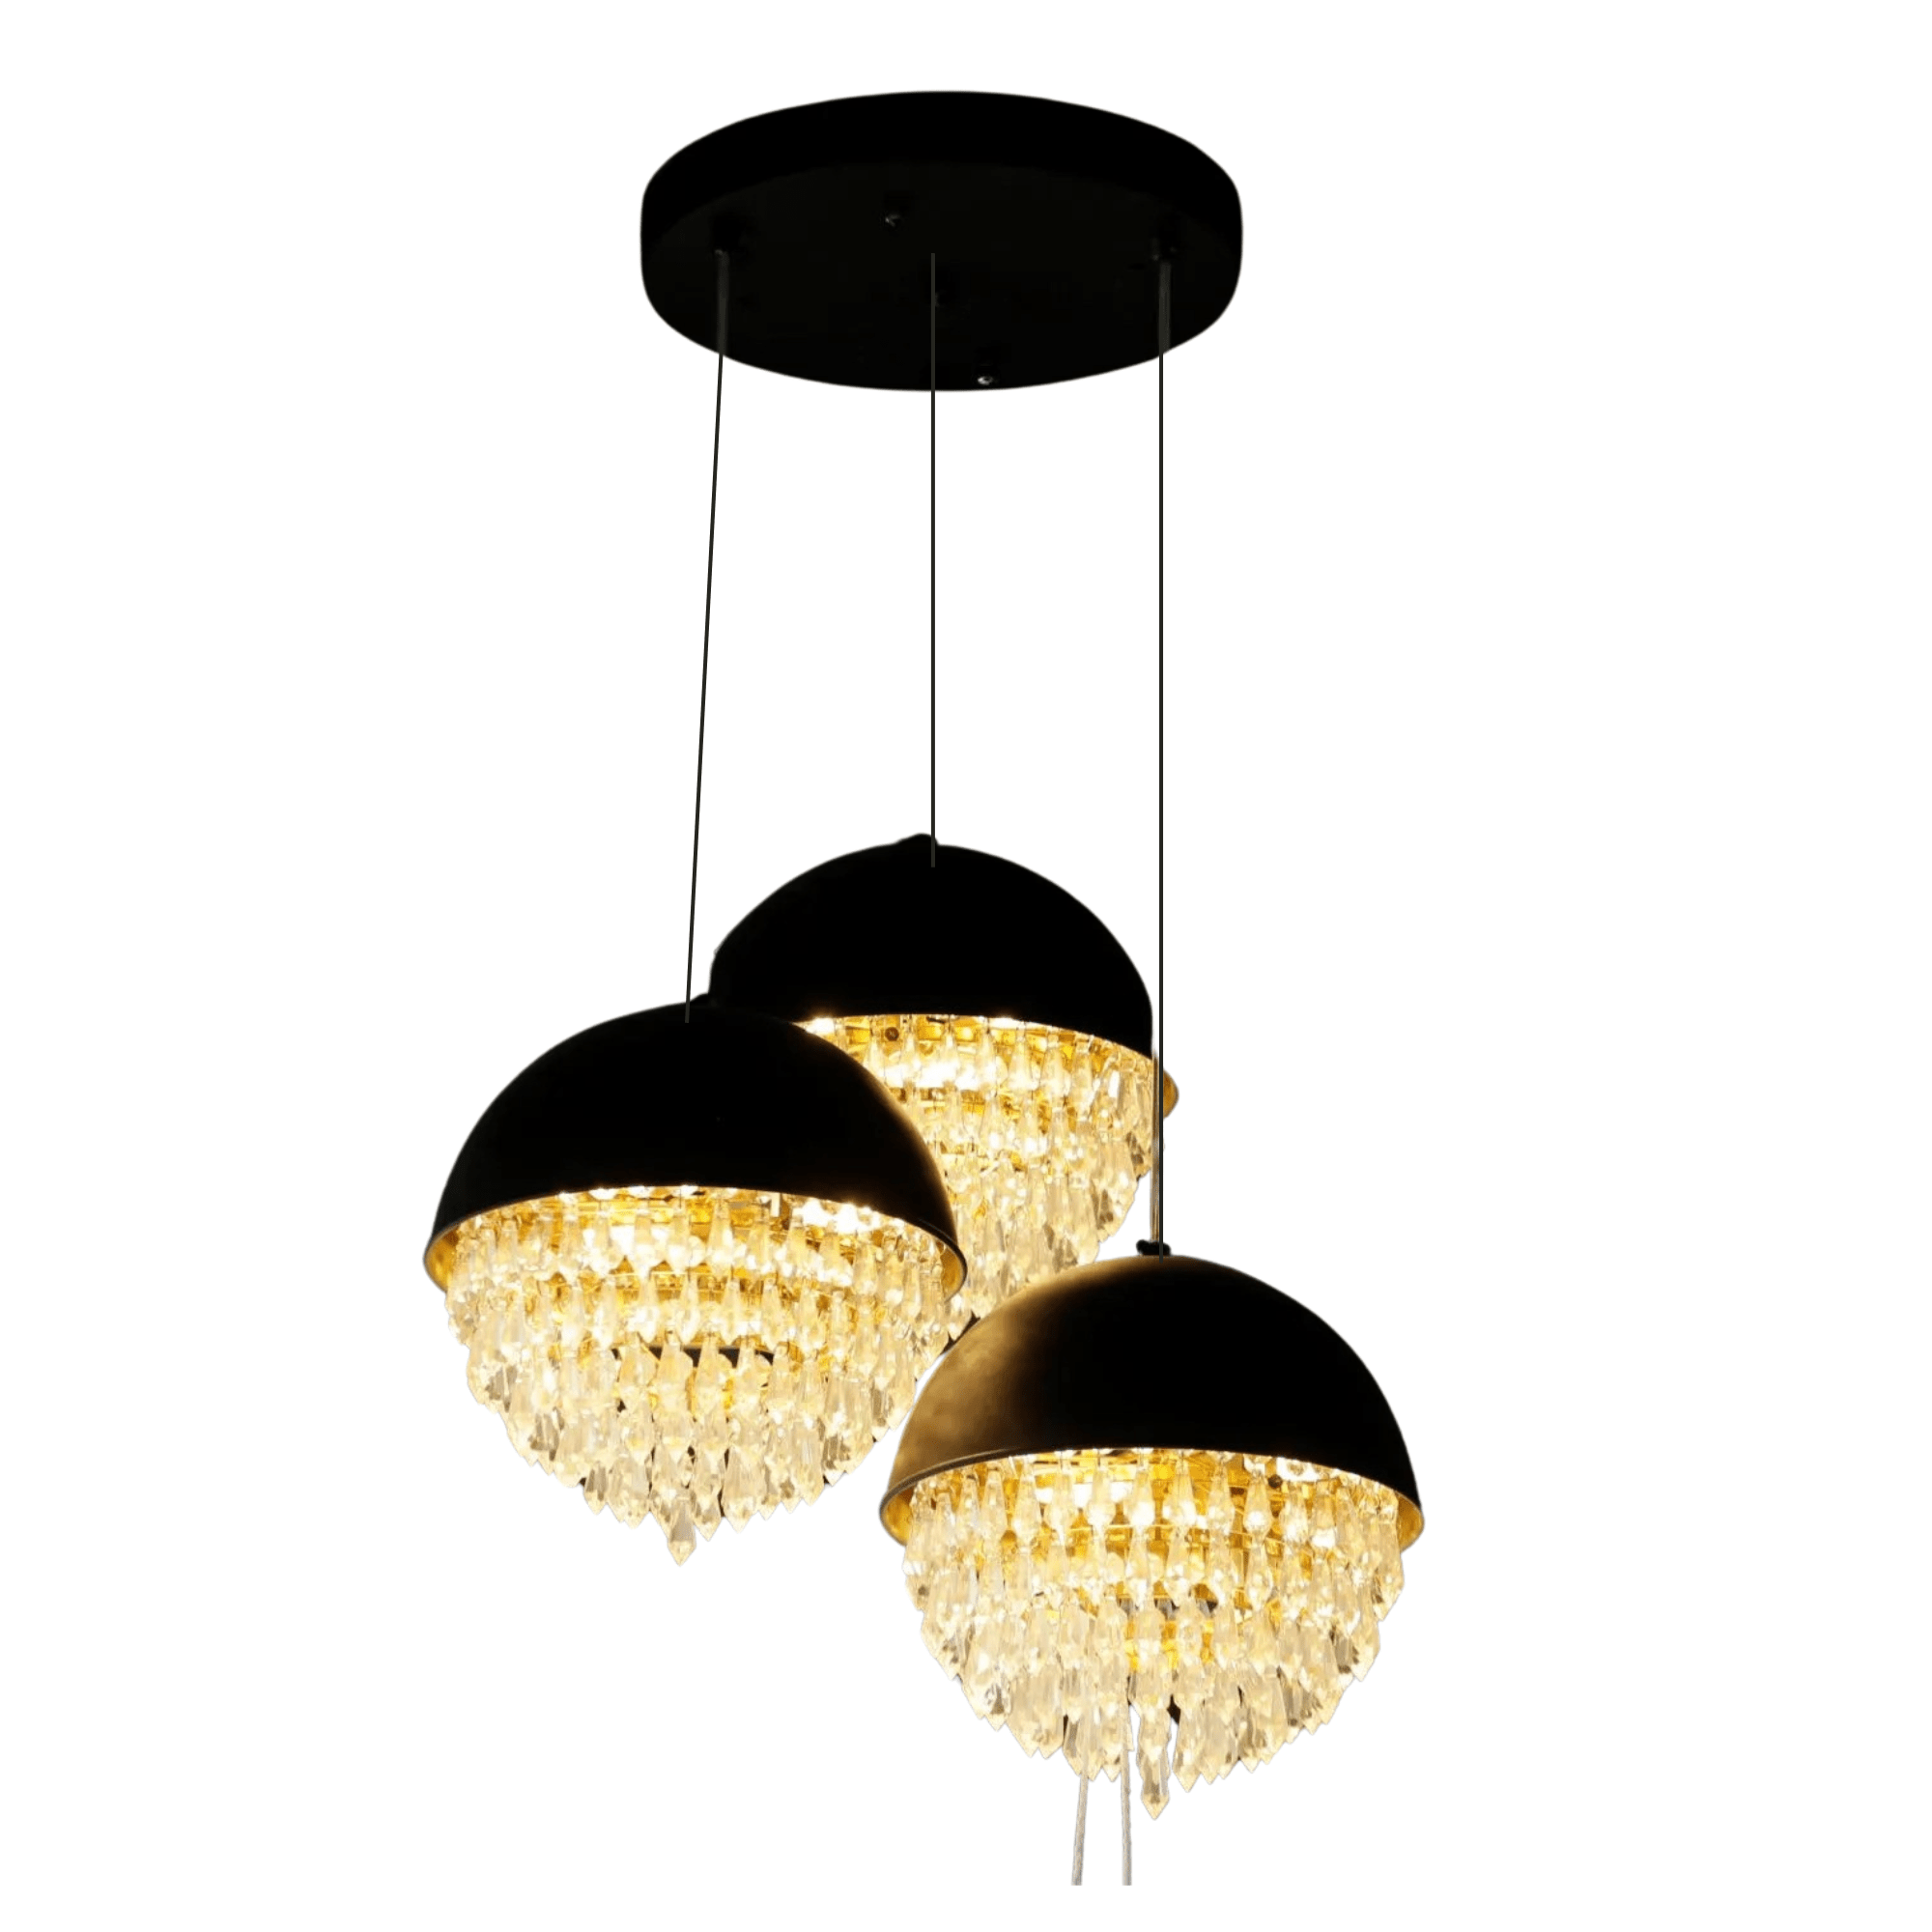 Shop Modern Crystal Ring Pendant Chandelier Light 20W - YLP0017/400 | Buy Online at Supply Master Accra, Ghana Lamps & Lightings Buy Tools hardware Building materials